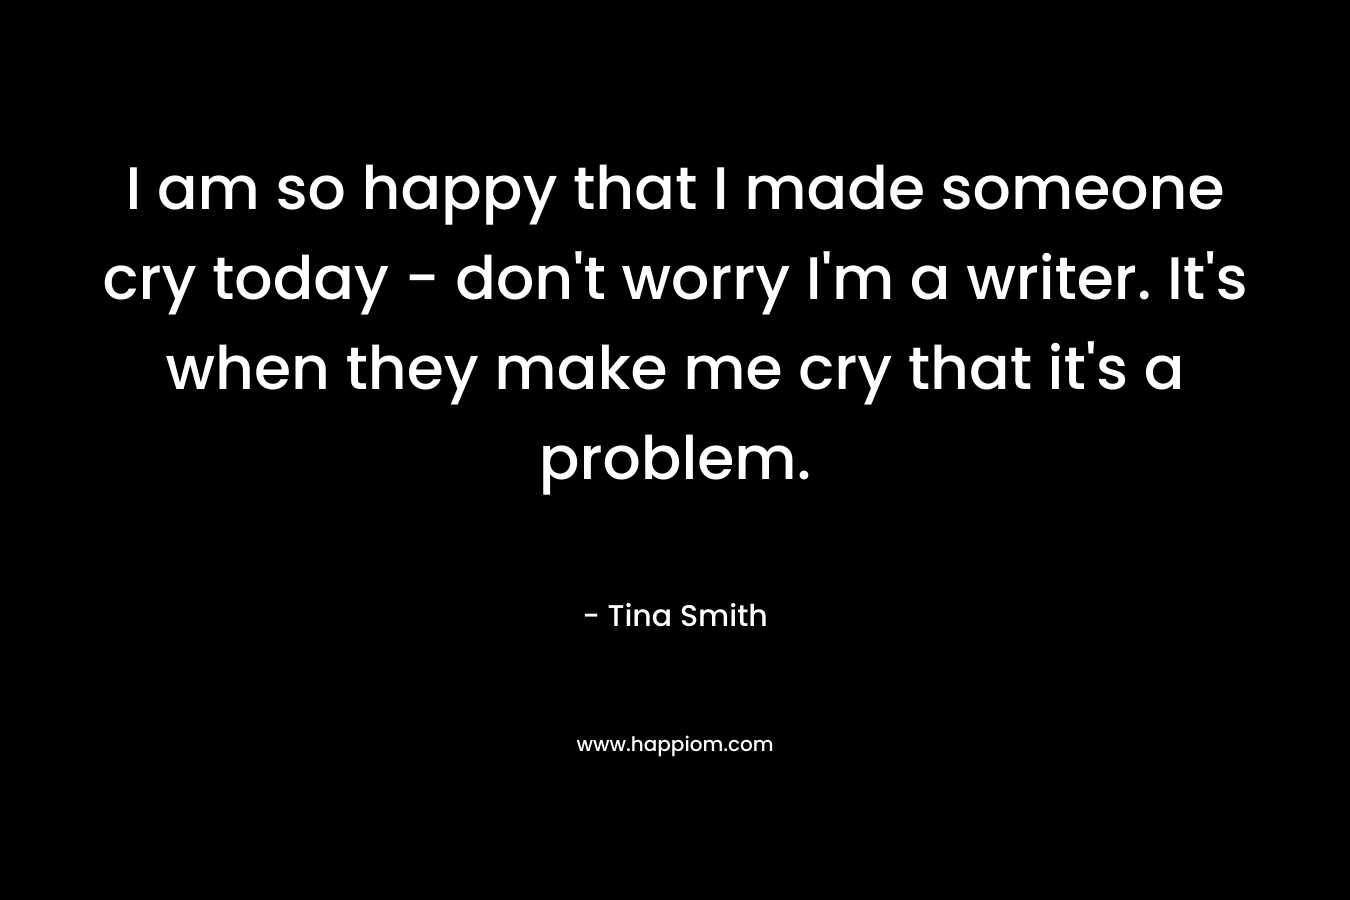 I am so happy that I made someone cry today - don't worry I'm a writer. It's when they make me cry that it's a problem.